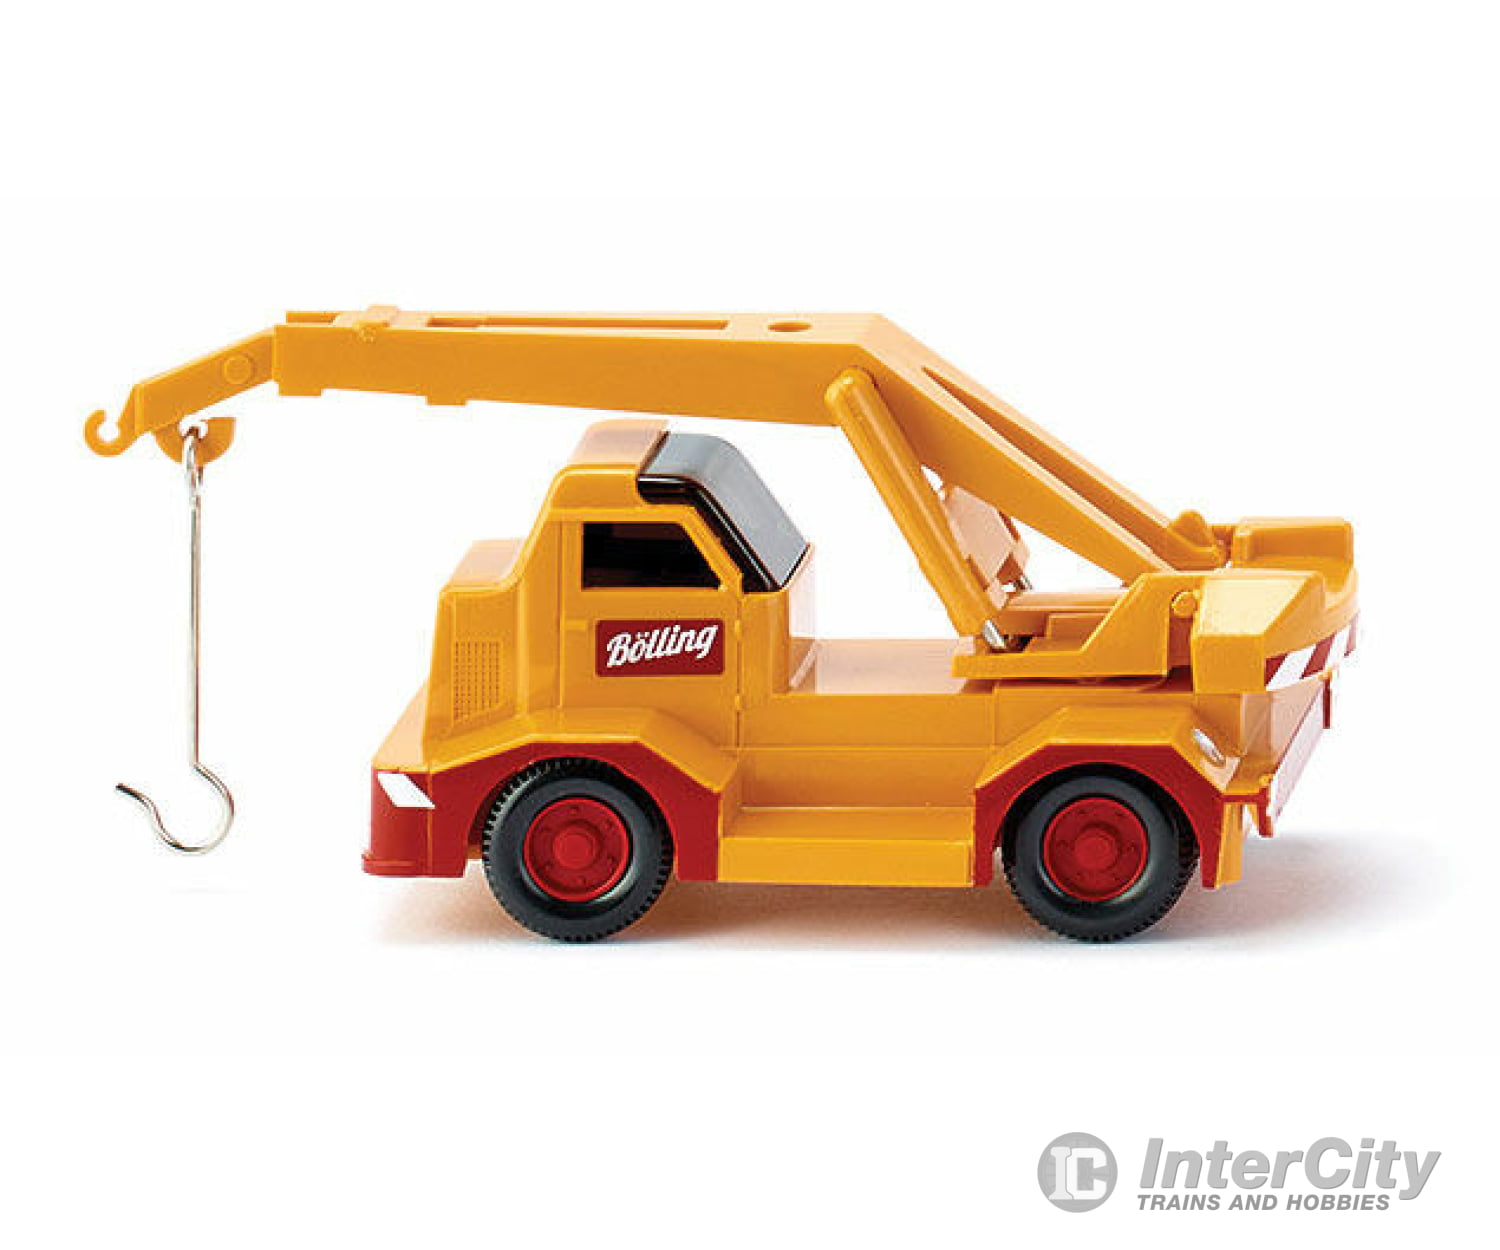 Wiking Ho 68002 1954 Demag V70 Mobile Crane Truck - Assembled -- Bolling (Yellow Red German